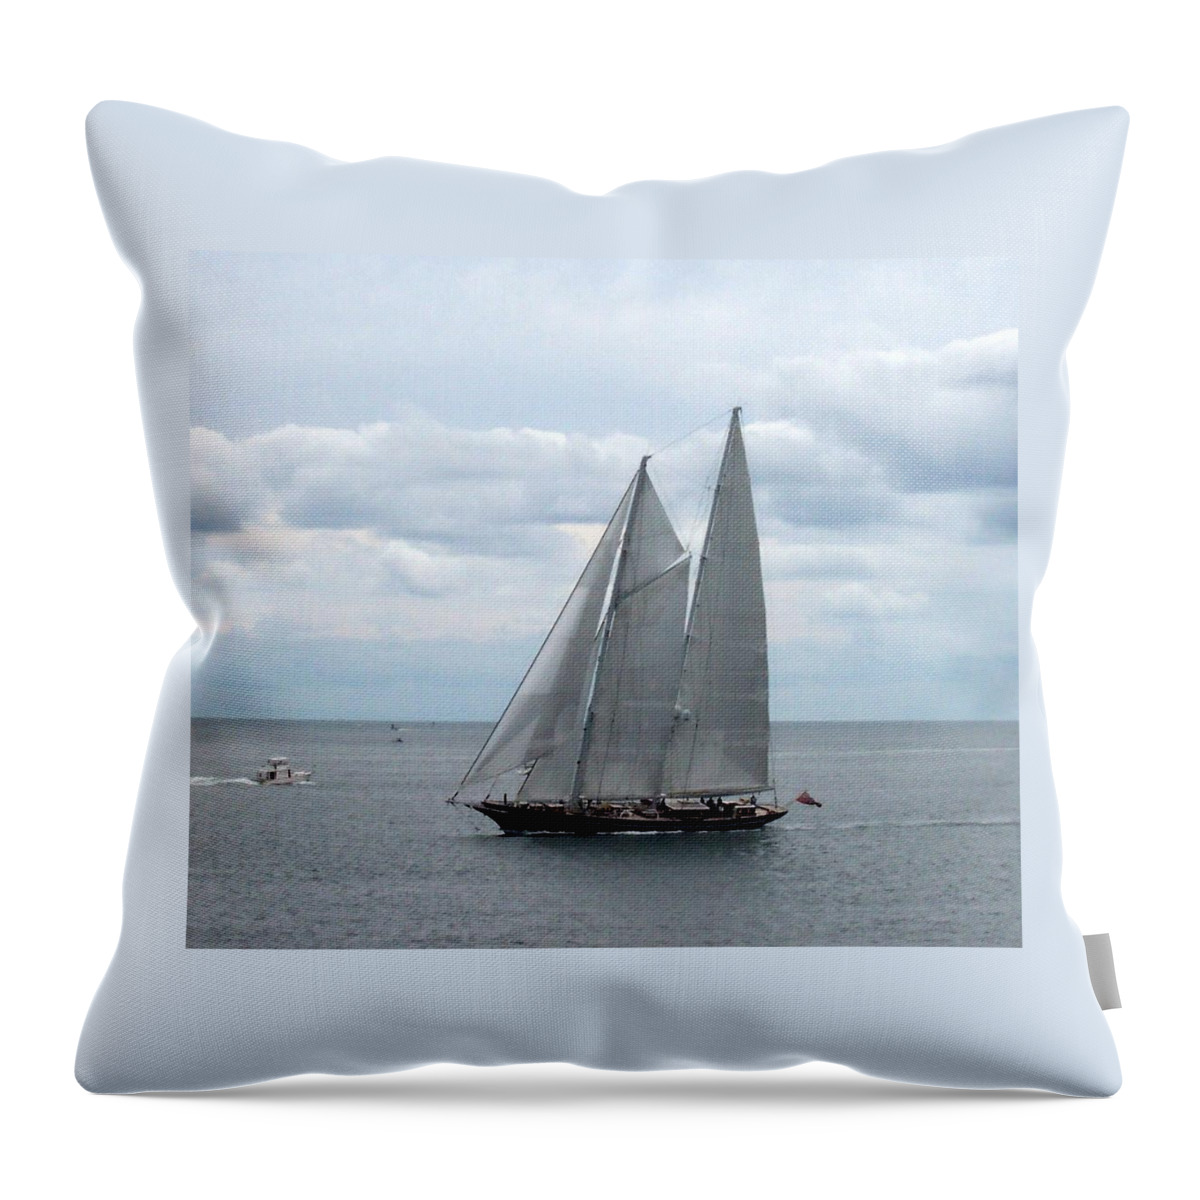 Newport Throw Pillow featuring the photograph Sailing Day by Catherine Gagne